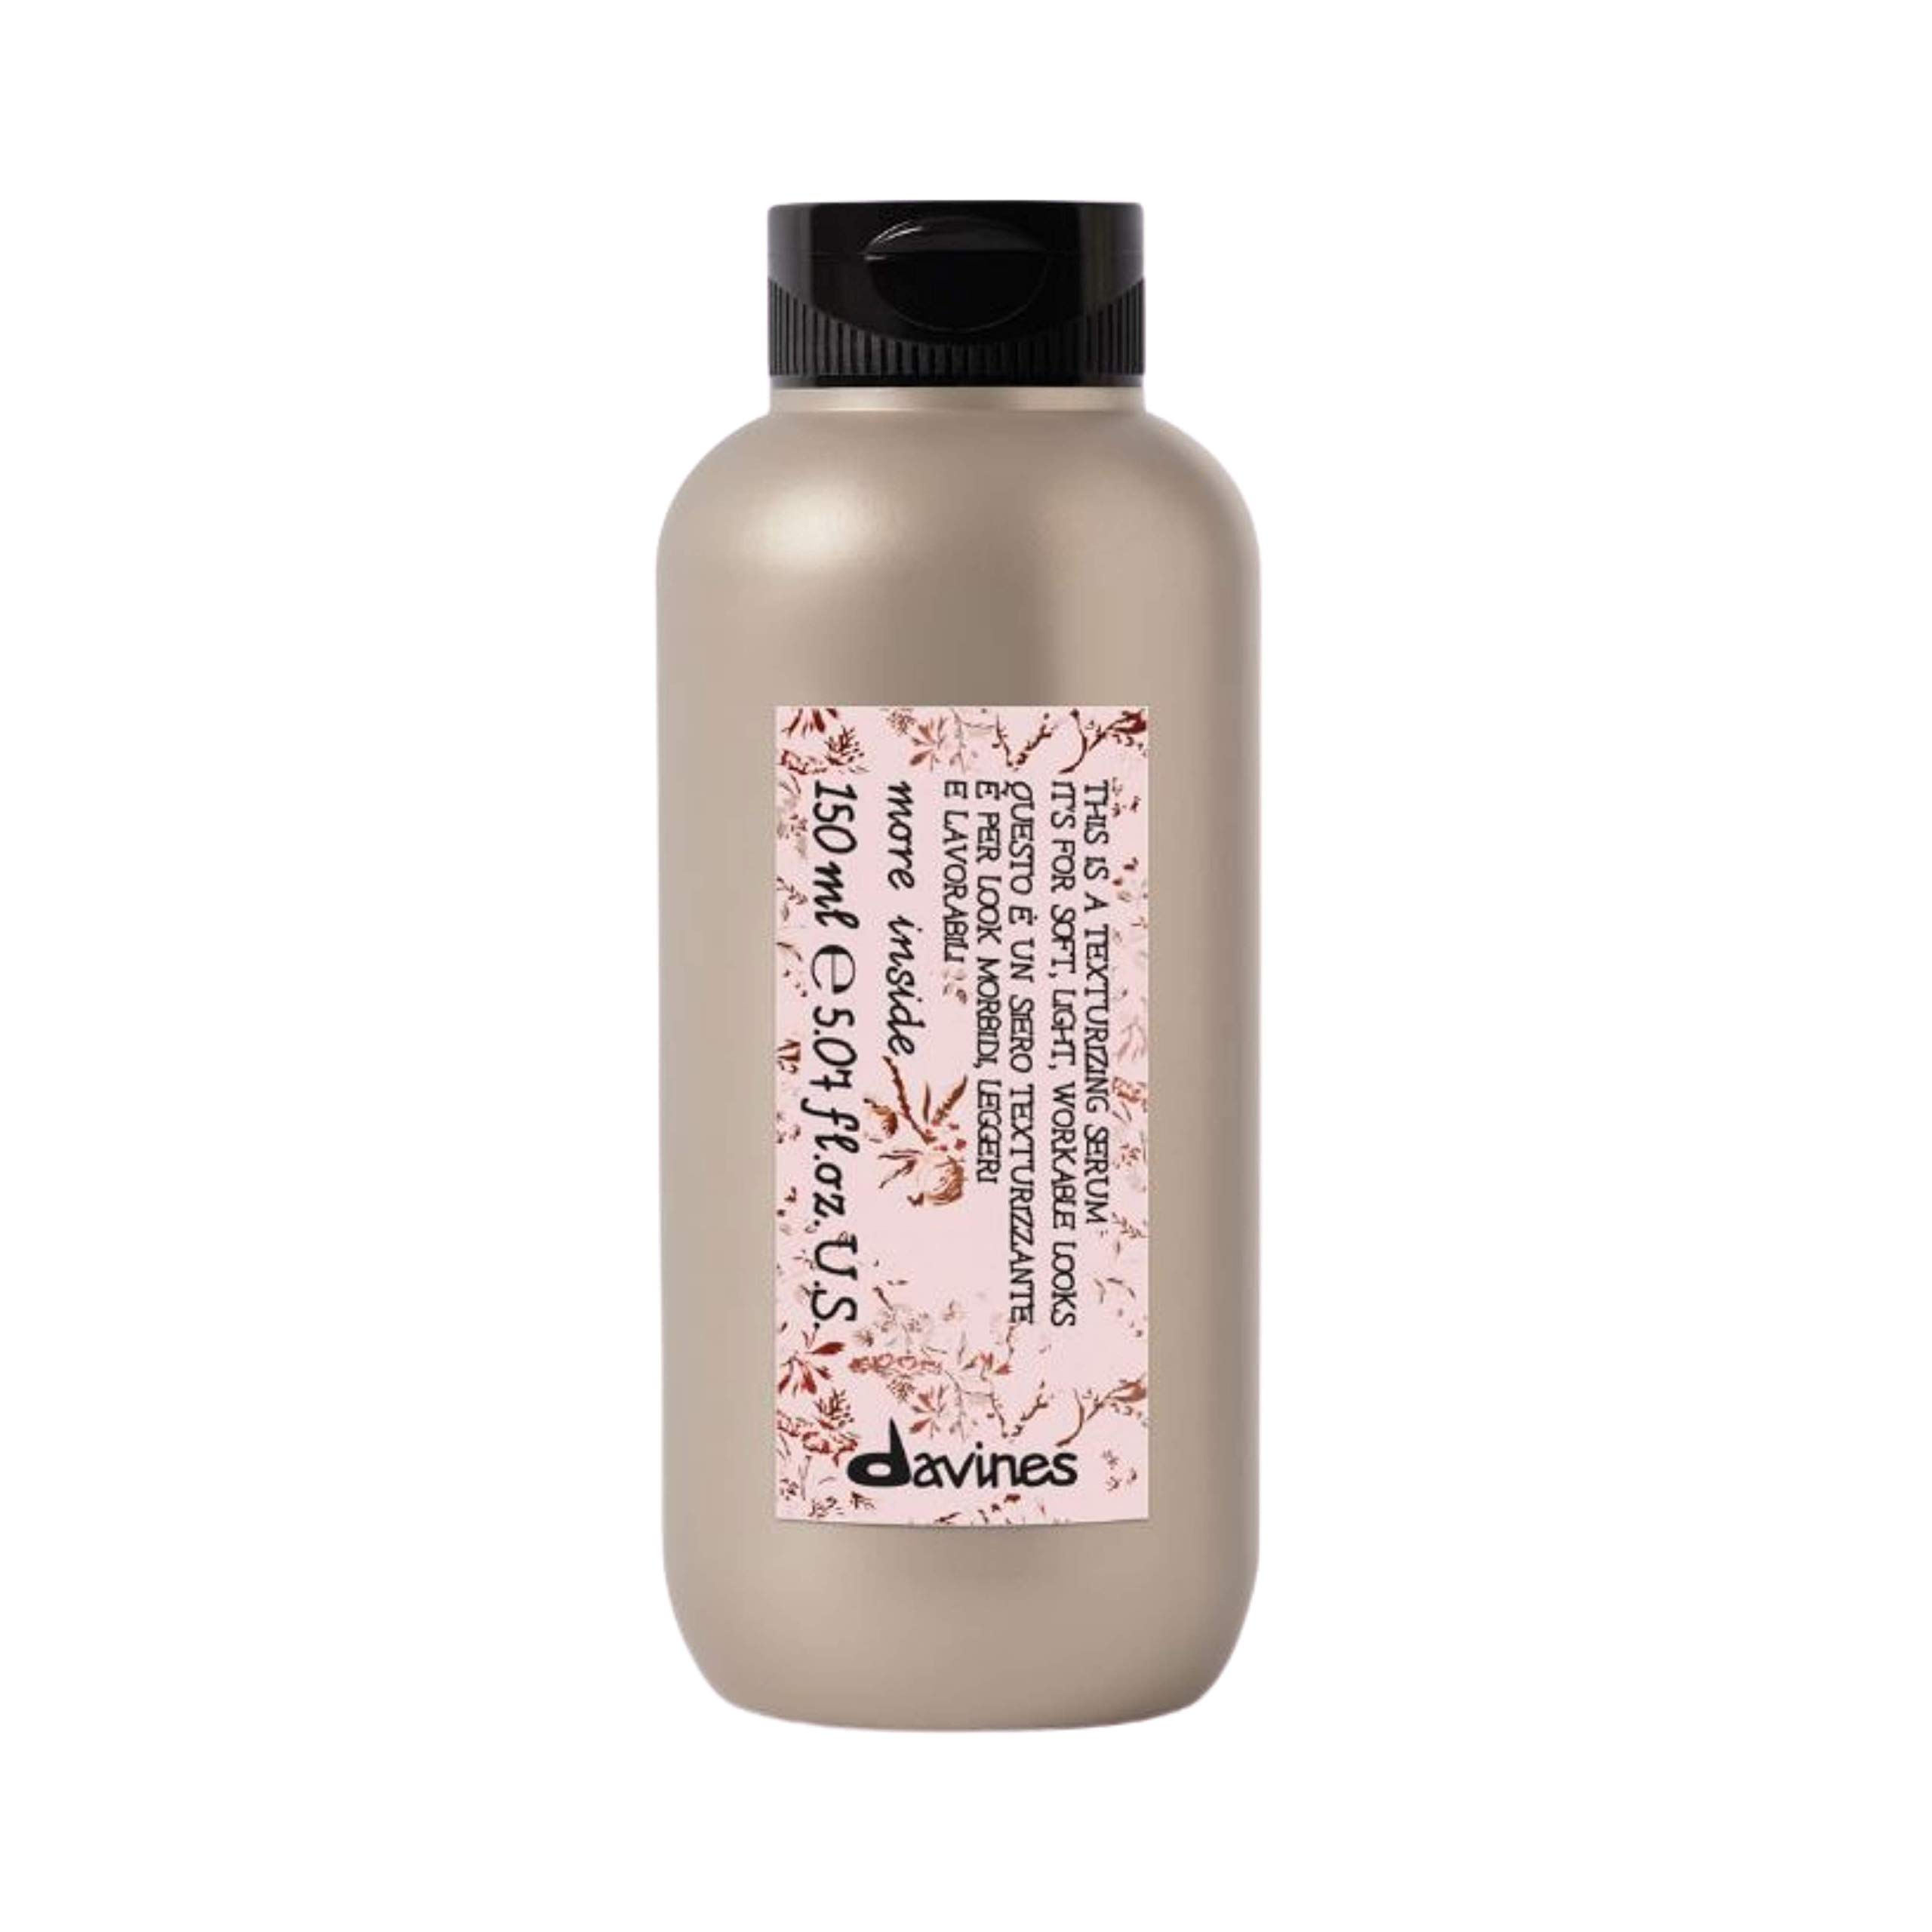 Davines This is a Texturizing Serum, Workable Formula For Creating Body And Structure, Shaping Blow Dry Styling, Paraben-Free, 5.07 Fl. Oz.